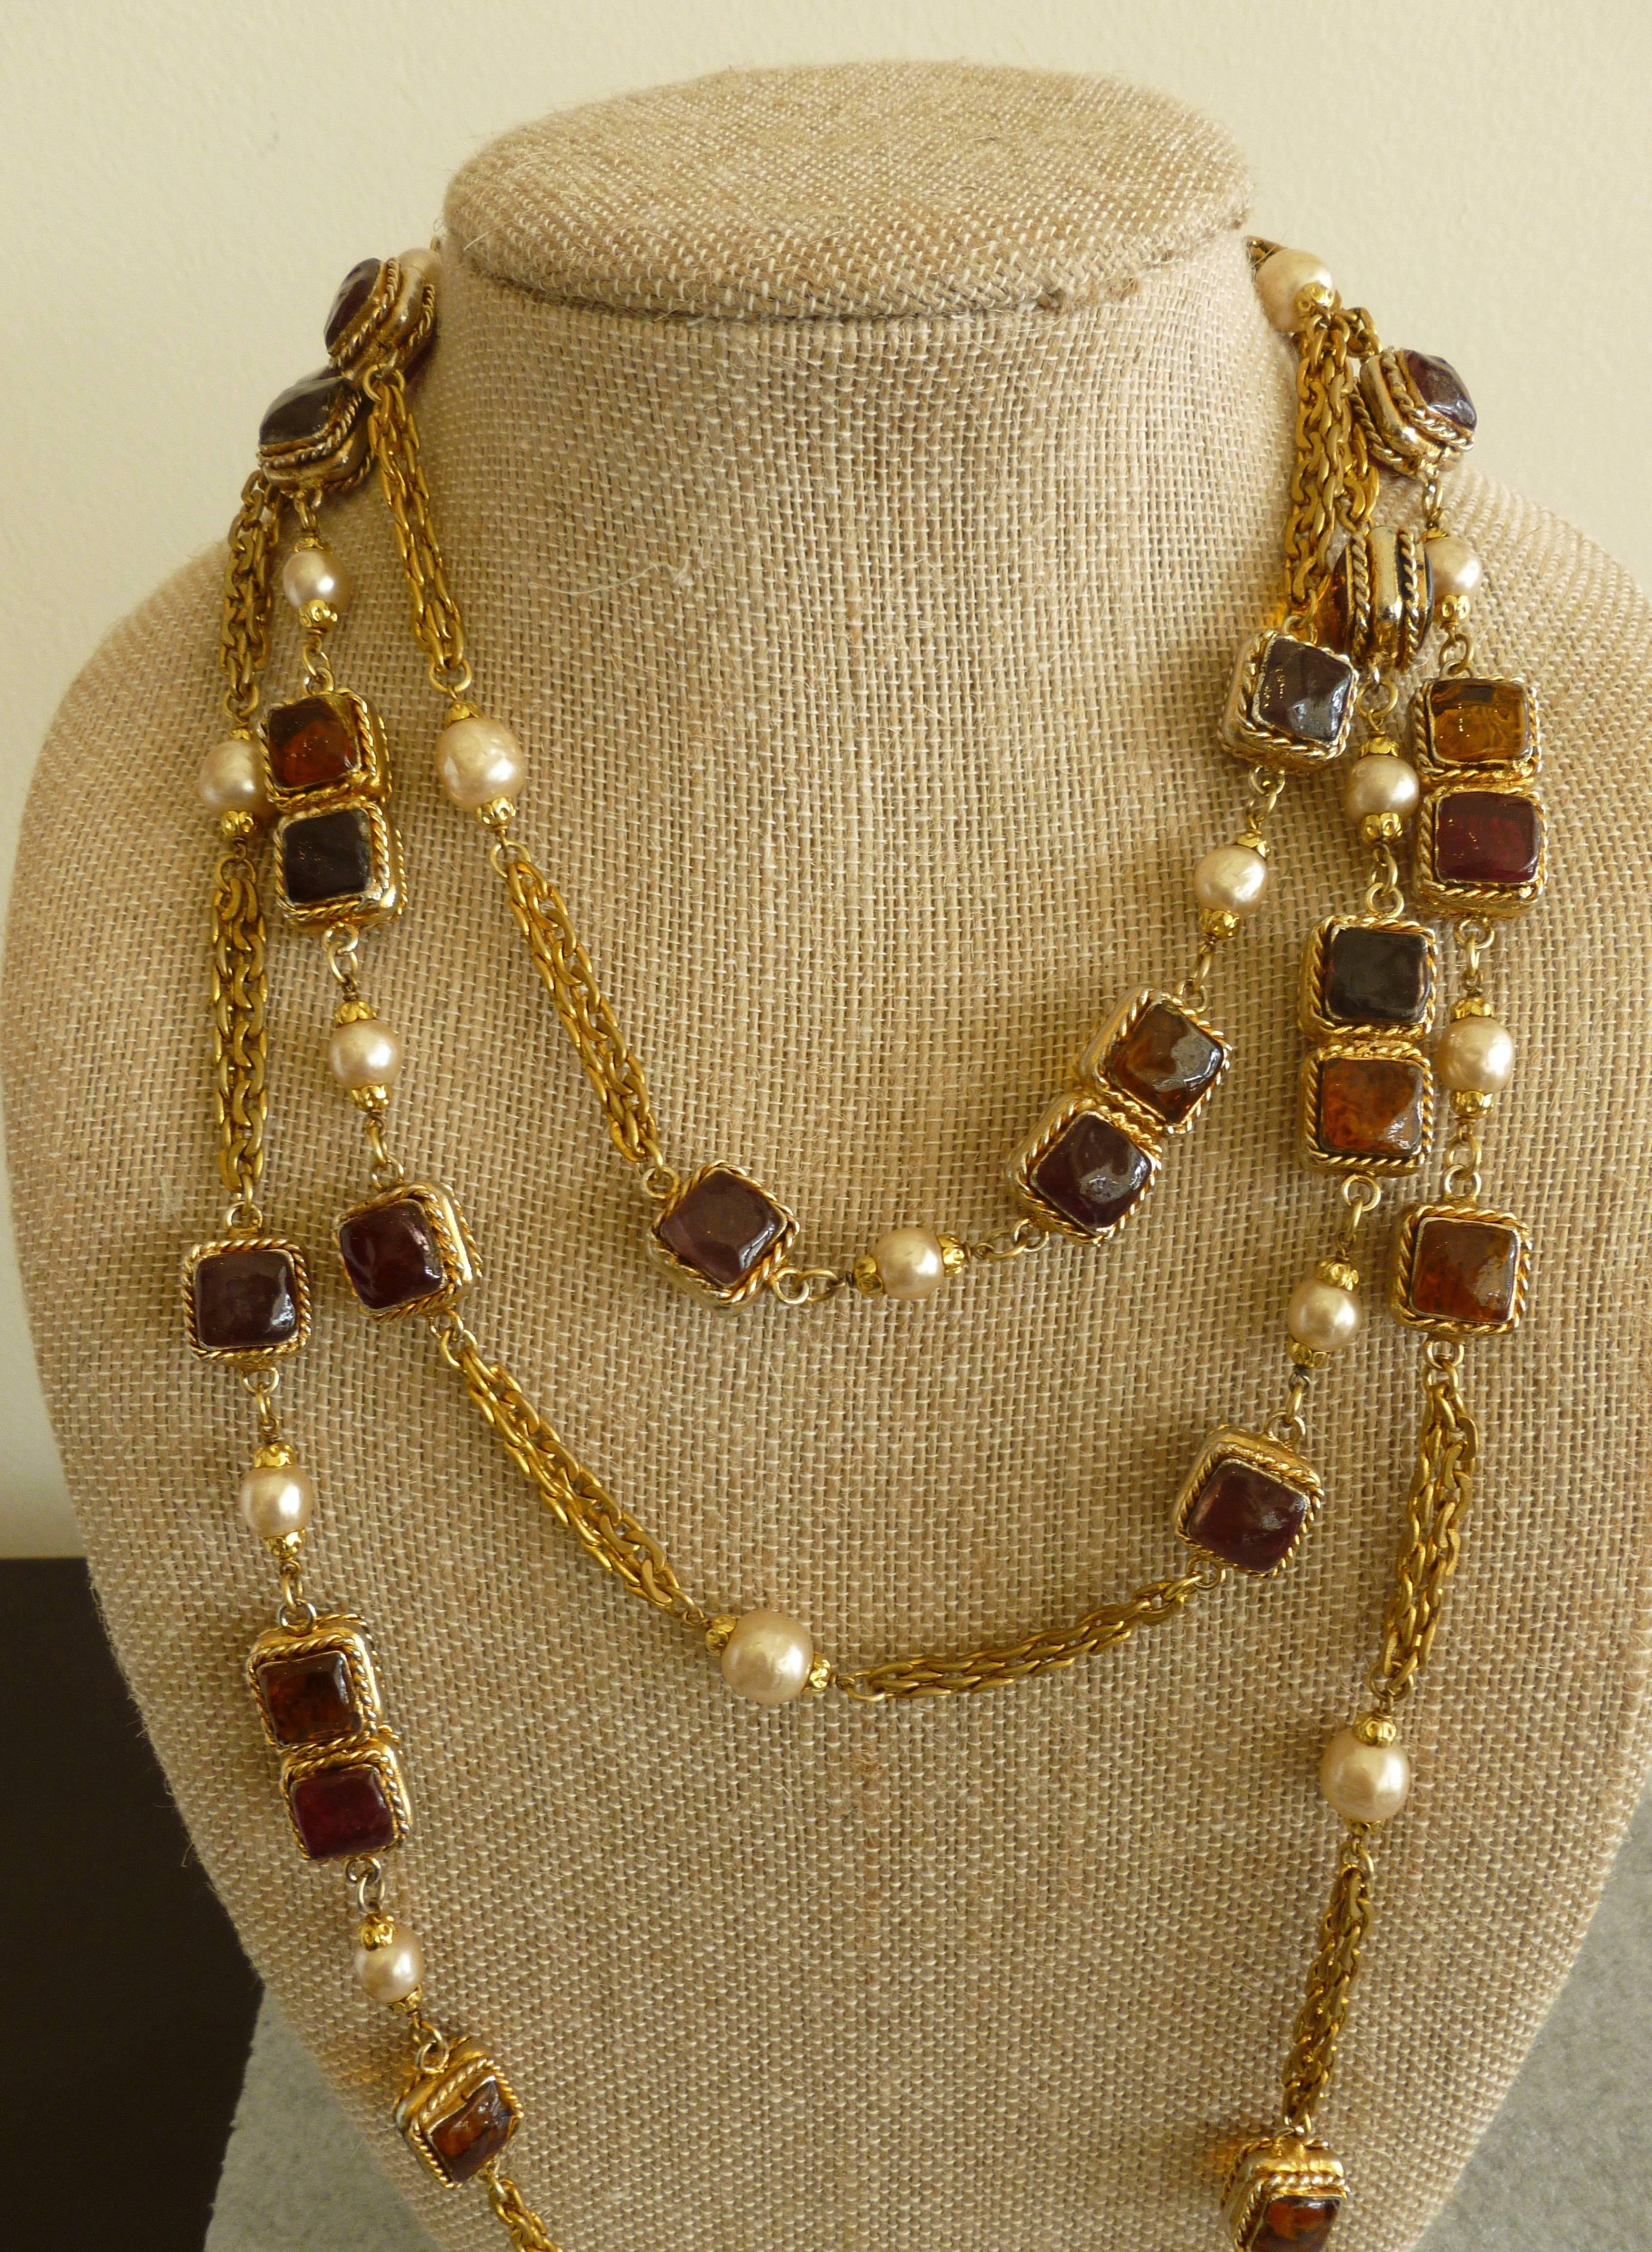 This exceptional and very rare hallmarked Chanel early necklace is gripoix glass, faux pearl, and gold chain link rope. The double chin links are two rows in-between the glass and  faux pearl. Interspersed are clear glass round gripoix glass.  It is